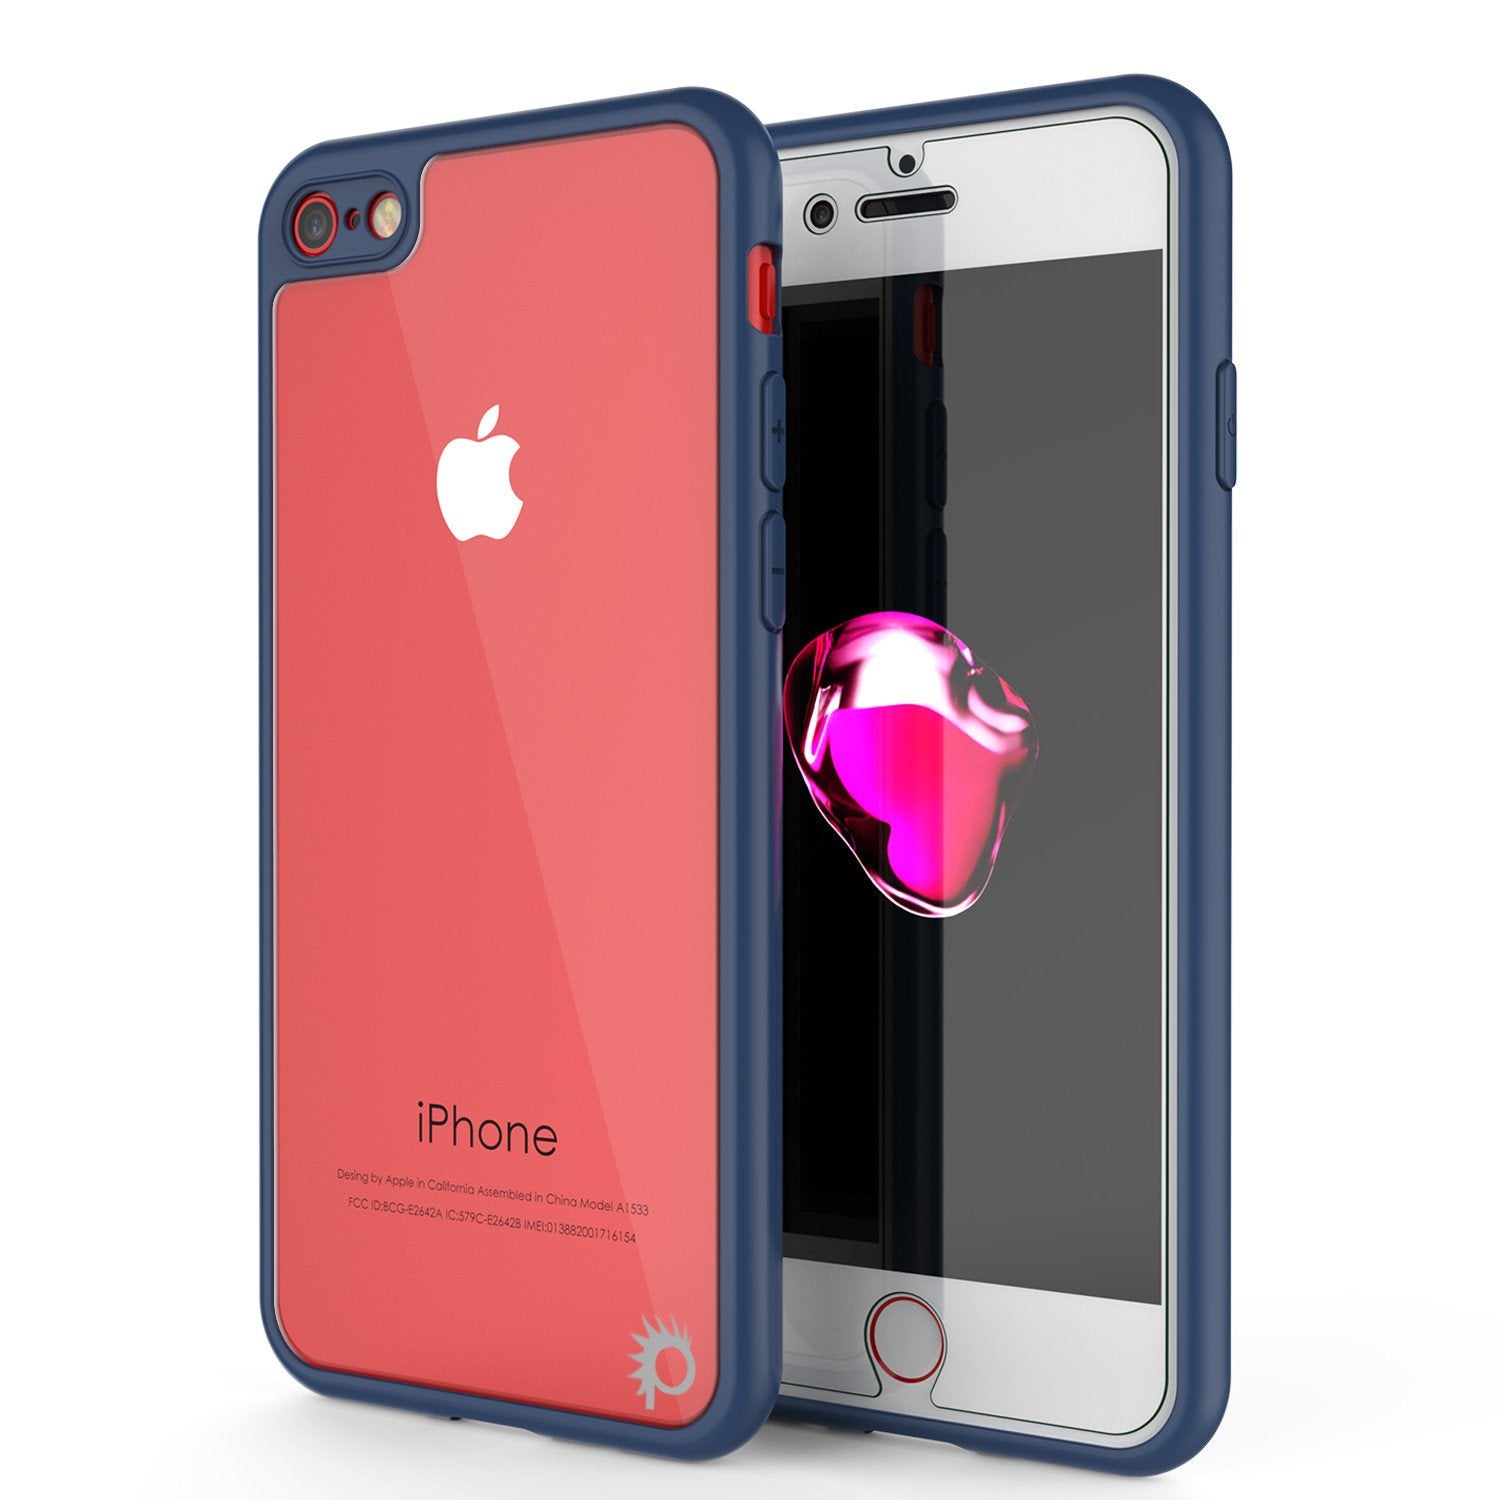 iPhone 7 Case [MASK Series] [NAVY] Full Body Hybrid Dual Layer TPU Cover W/ protective Tempered Glass Screen Protector - PunkCase NZ